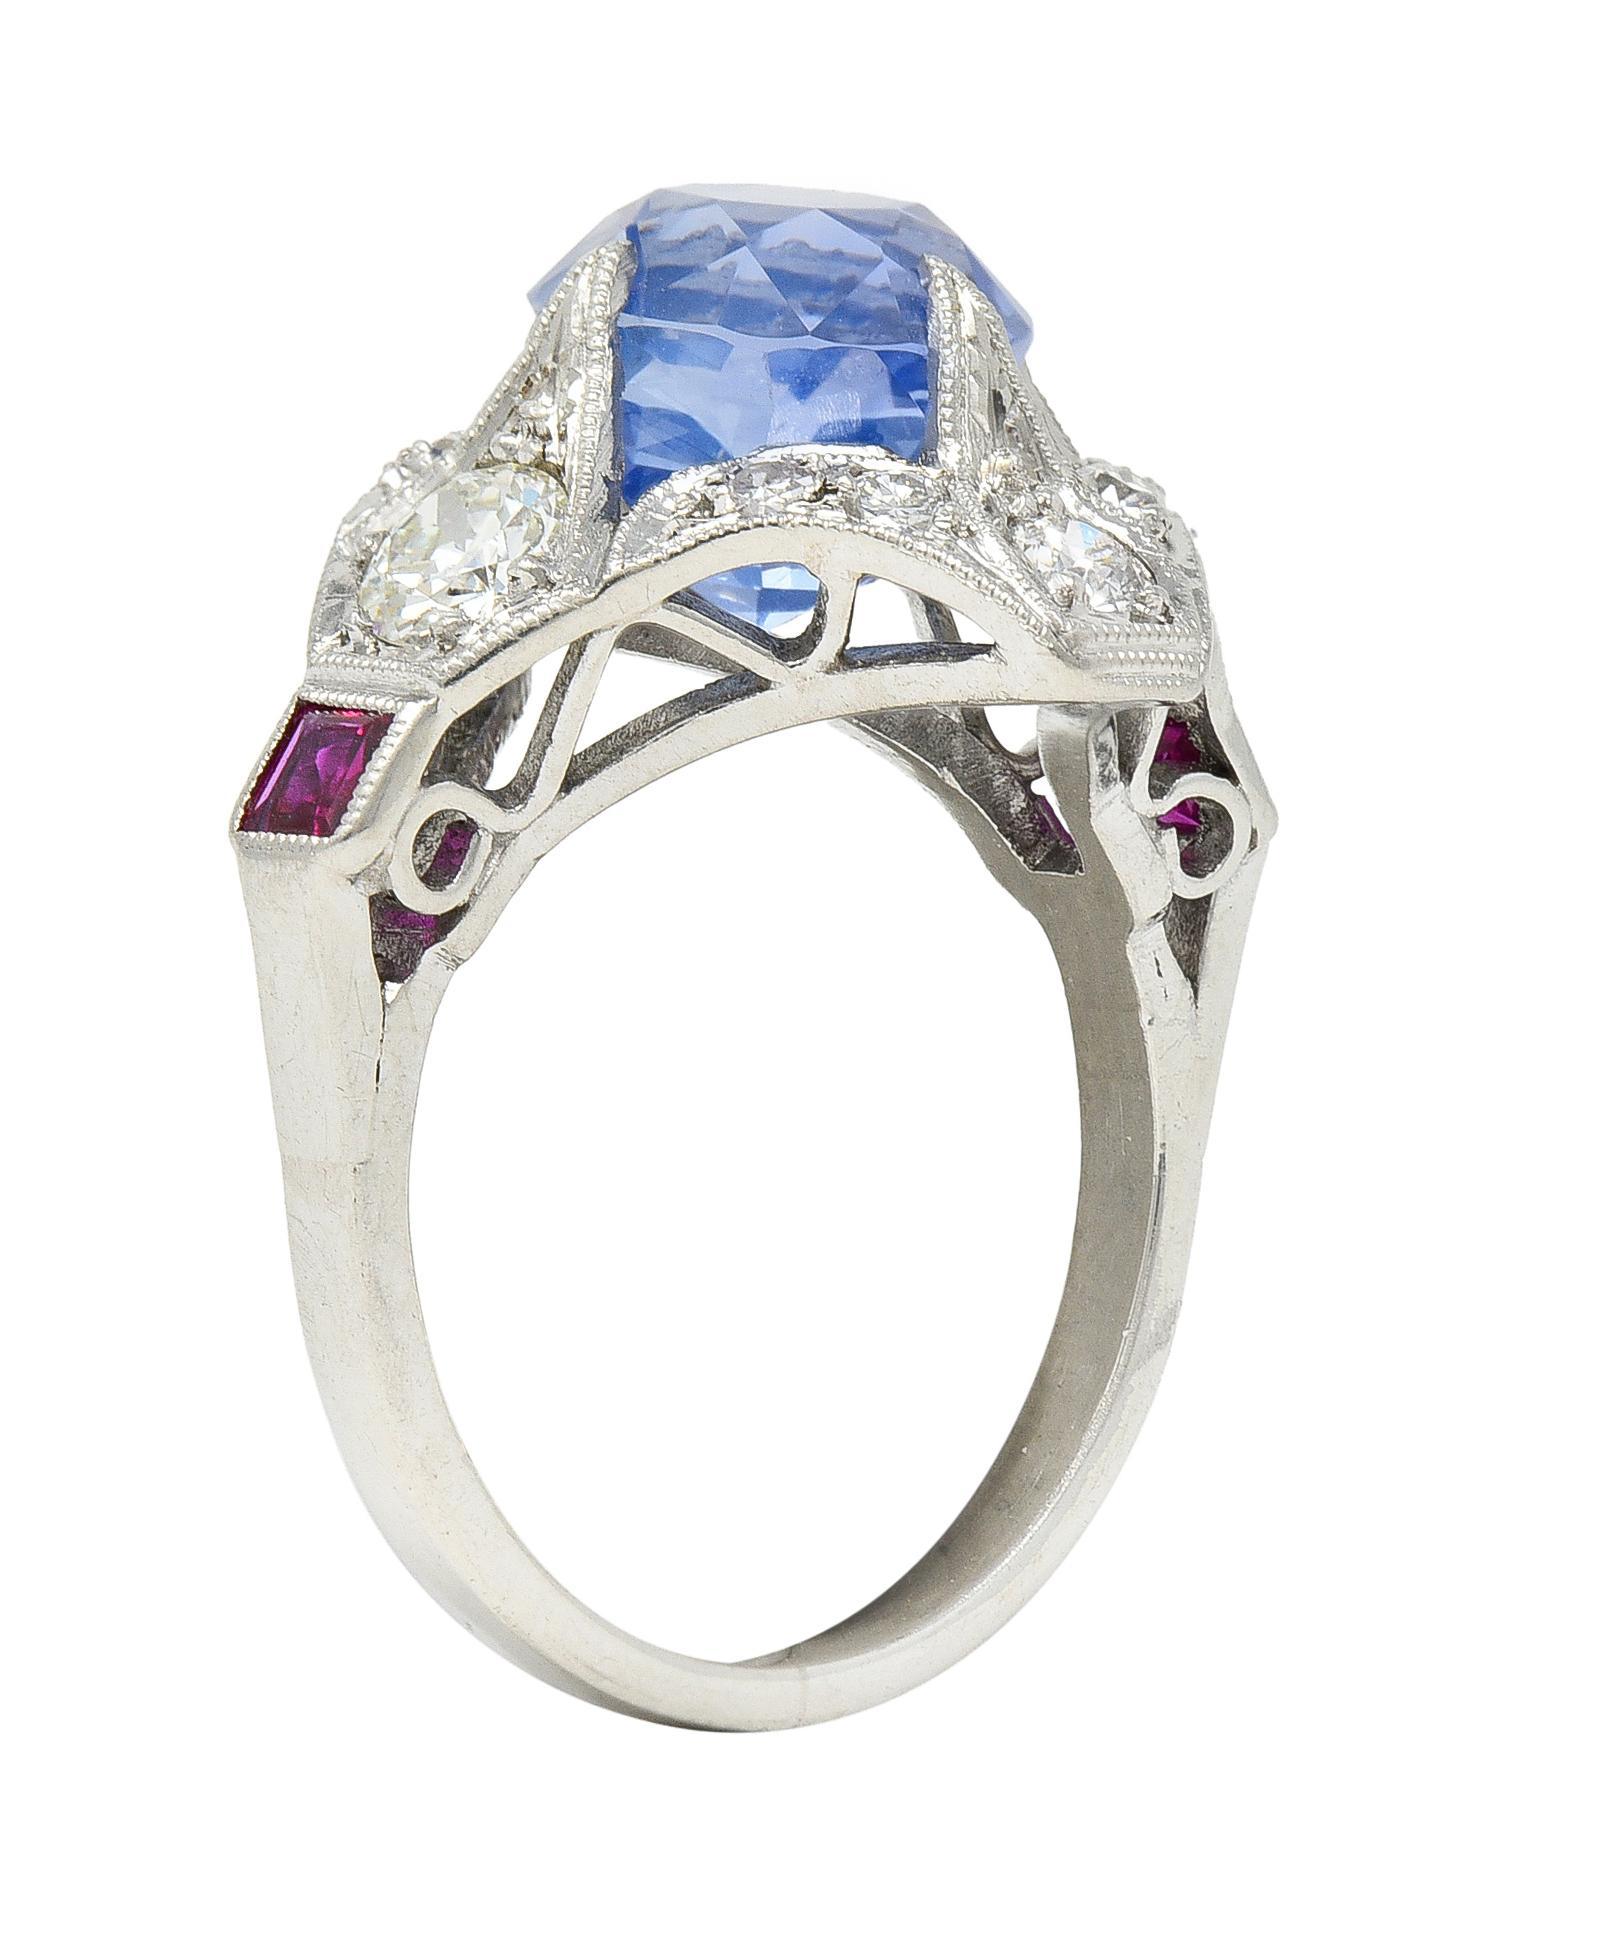 Centering a cushion cut sapphire weighing approximately 3.55 carats - transparent light cornflower blue in color
Natural Sri Lankan in origin with no indications of heat treatment - prong set to appear floating 
With talon prongs and